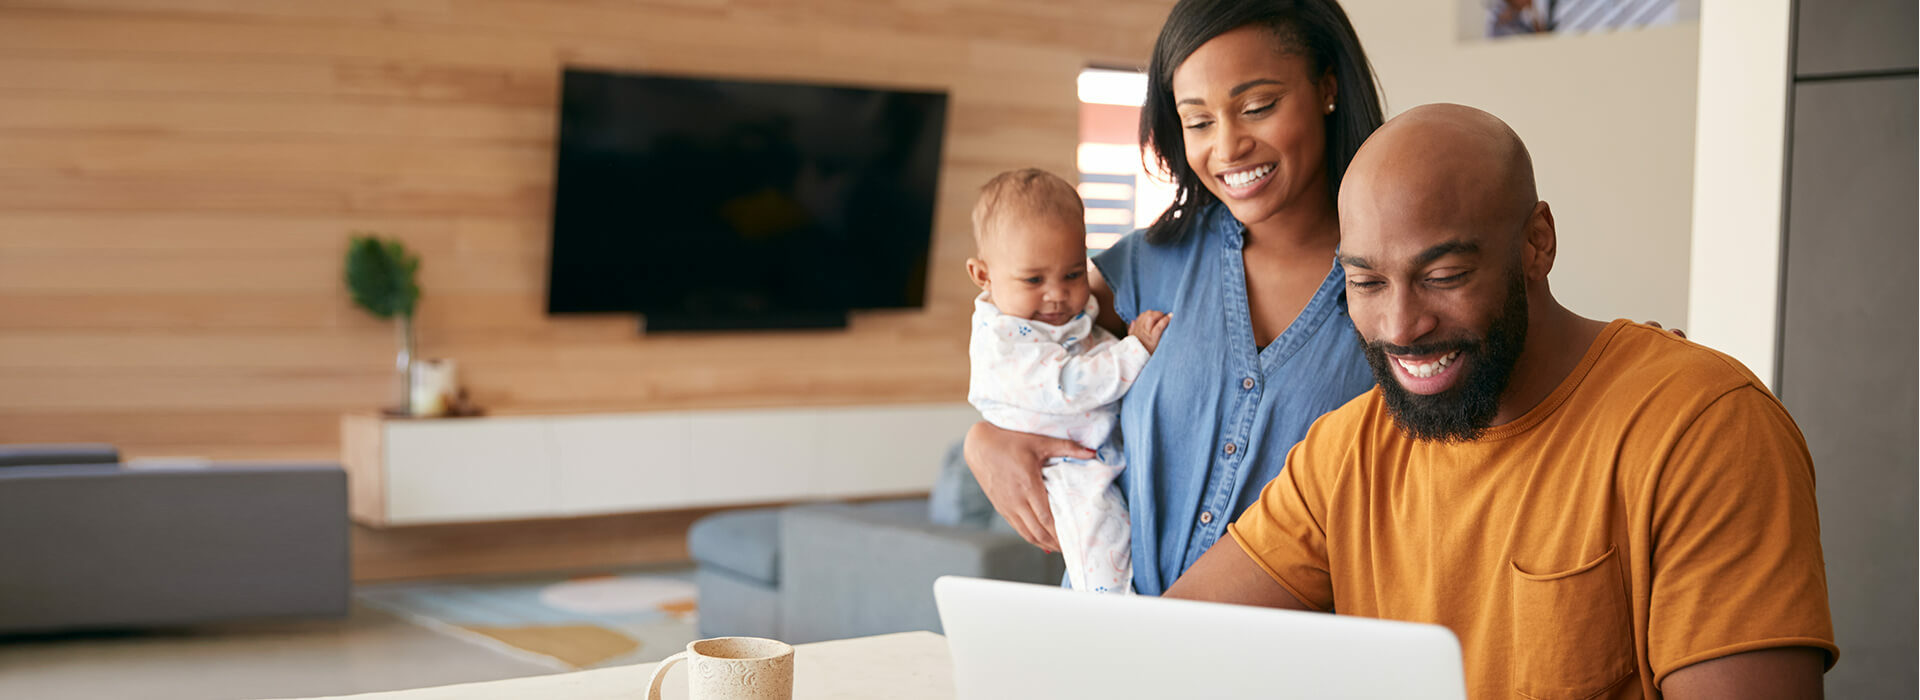 Black family with baby looking at laptop.